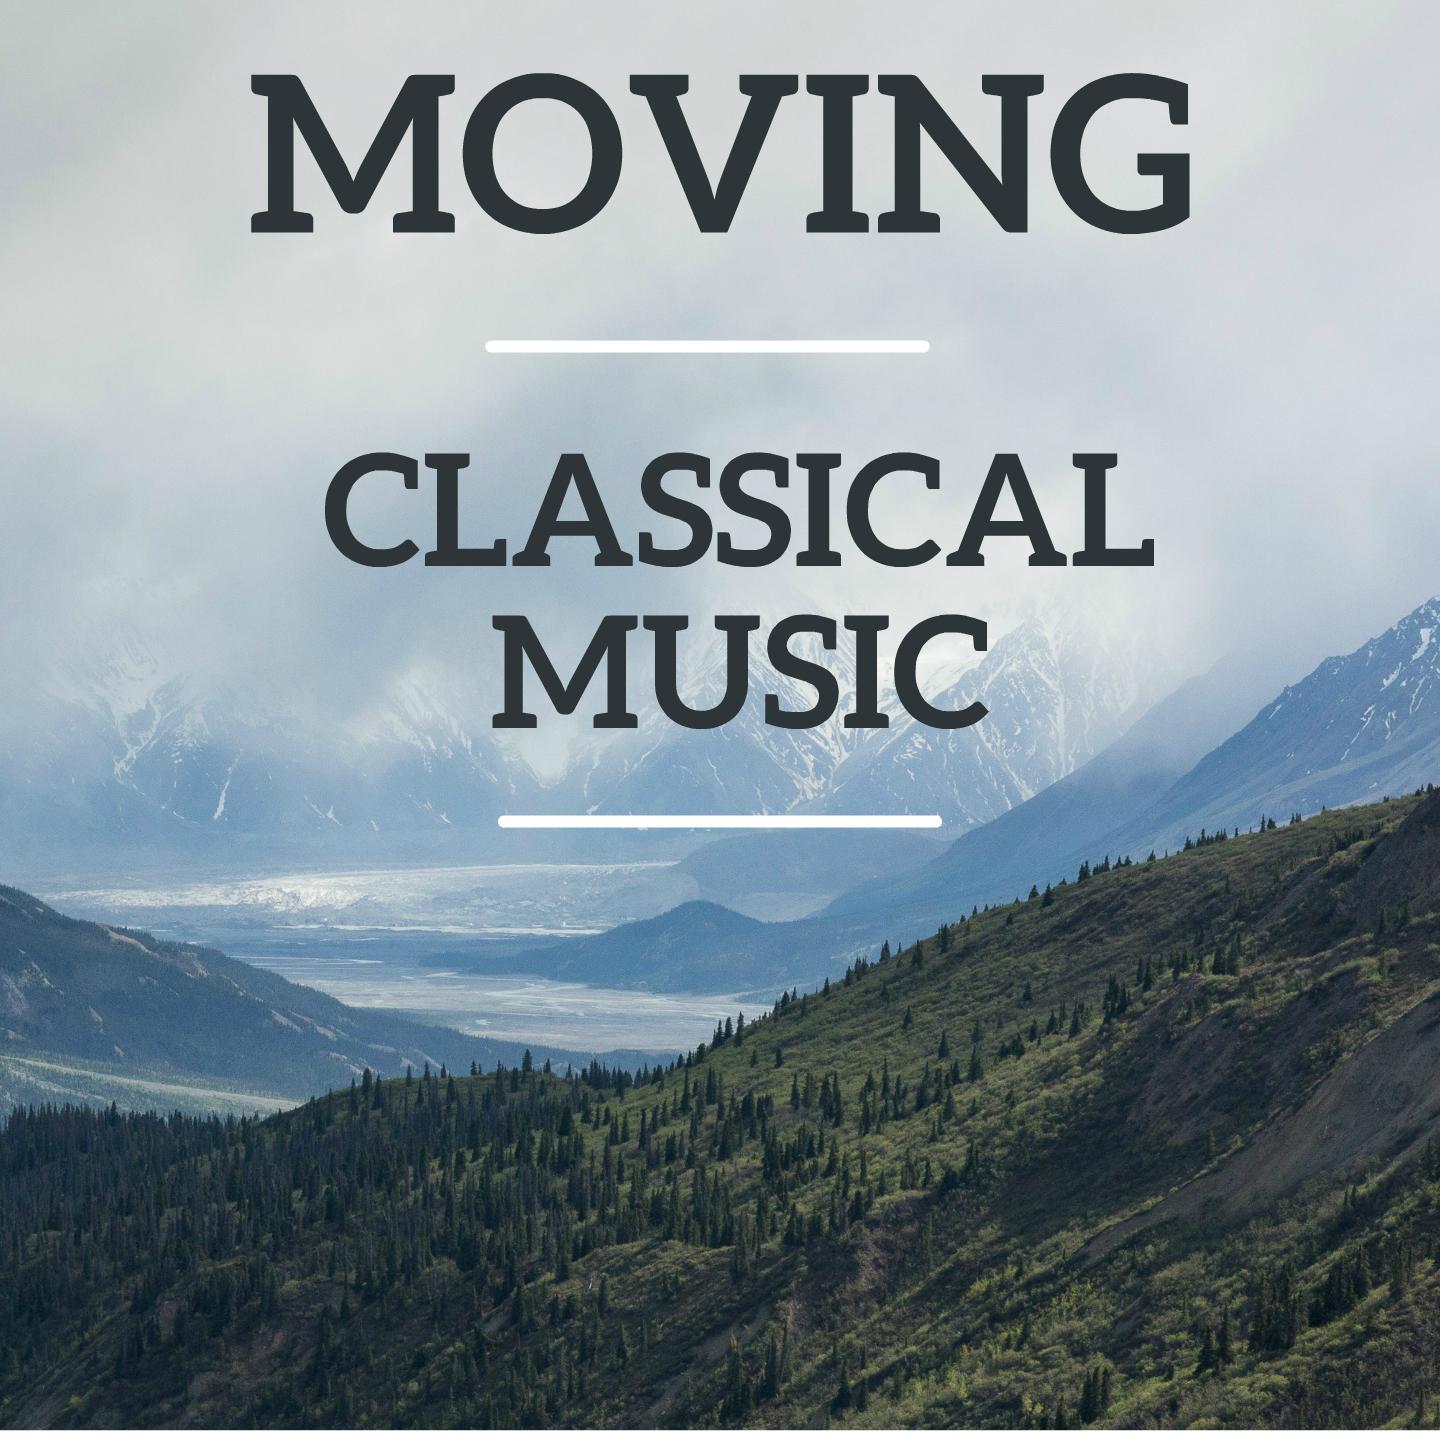 Moving Classical Music